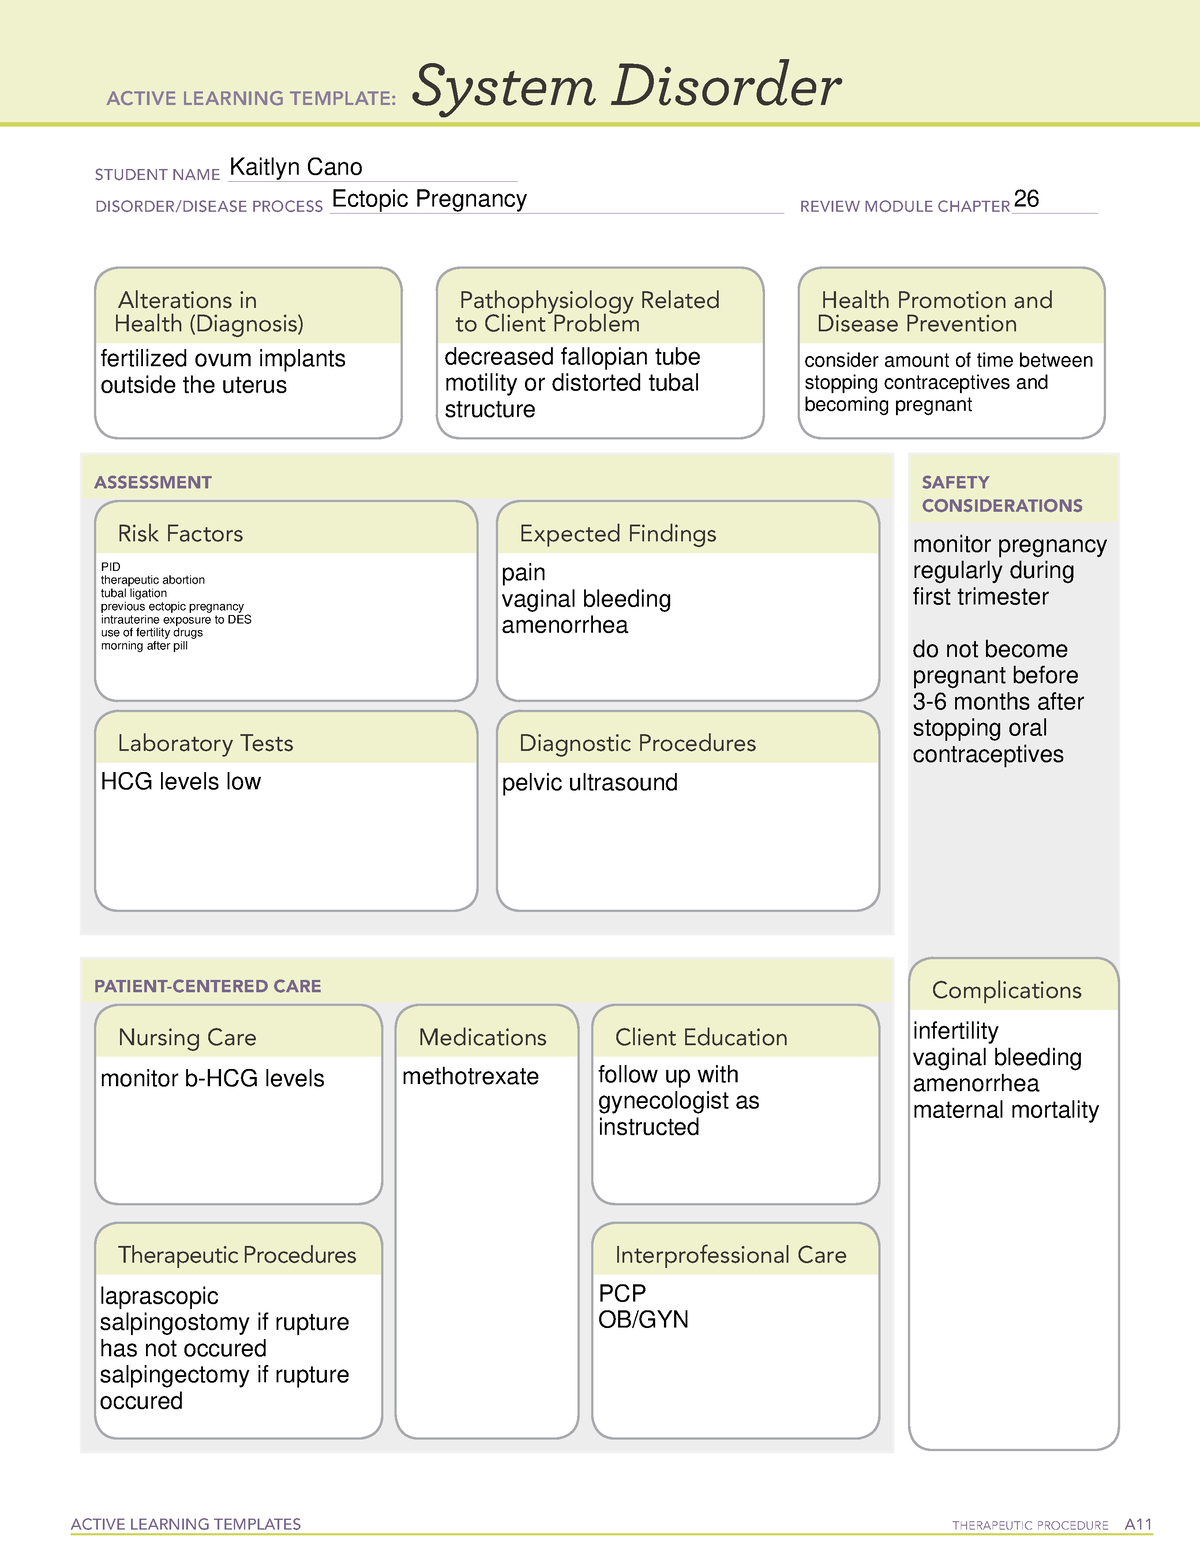 Ectopic Pregnancy Template - ACTIVE LEARNING TEMPLATES THERAPEUTIC ...